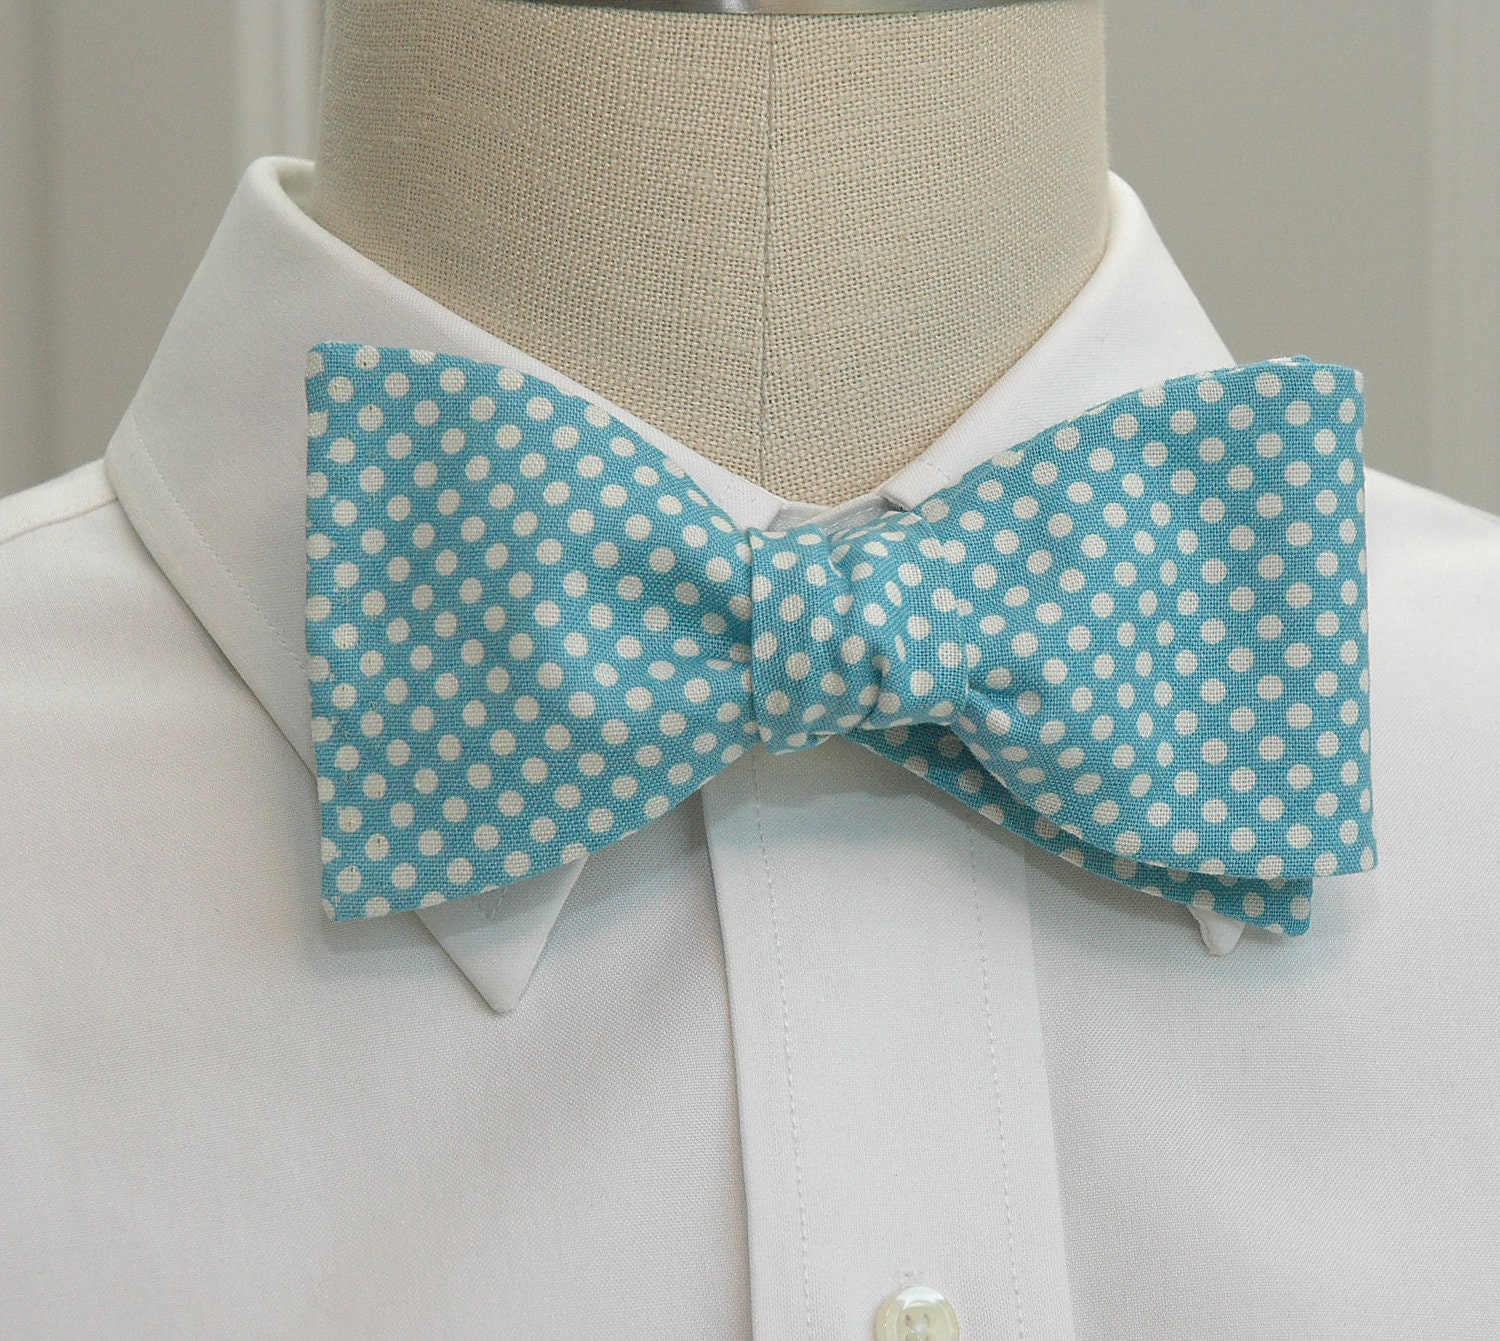 Men's Bow Tie blue and white polka dots groom bow tie